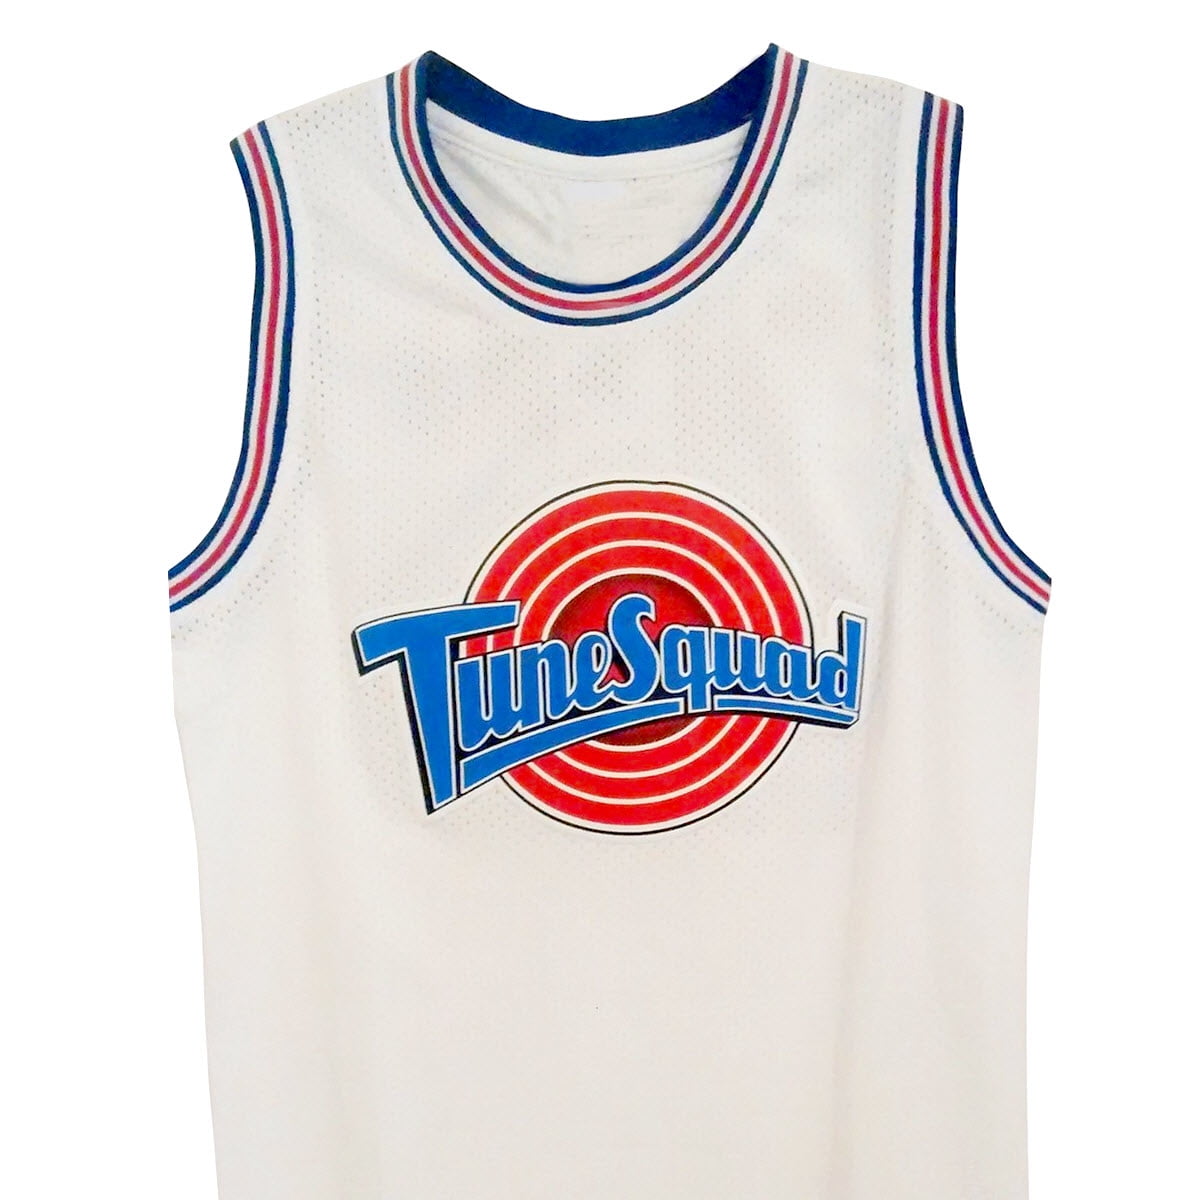 Toon Squad – Basketball Jersey